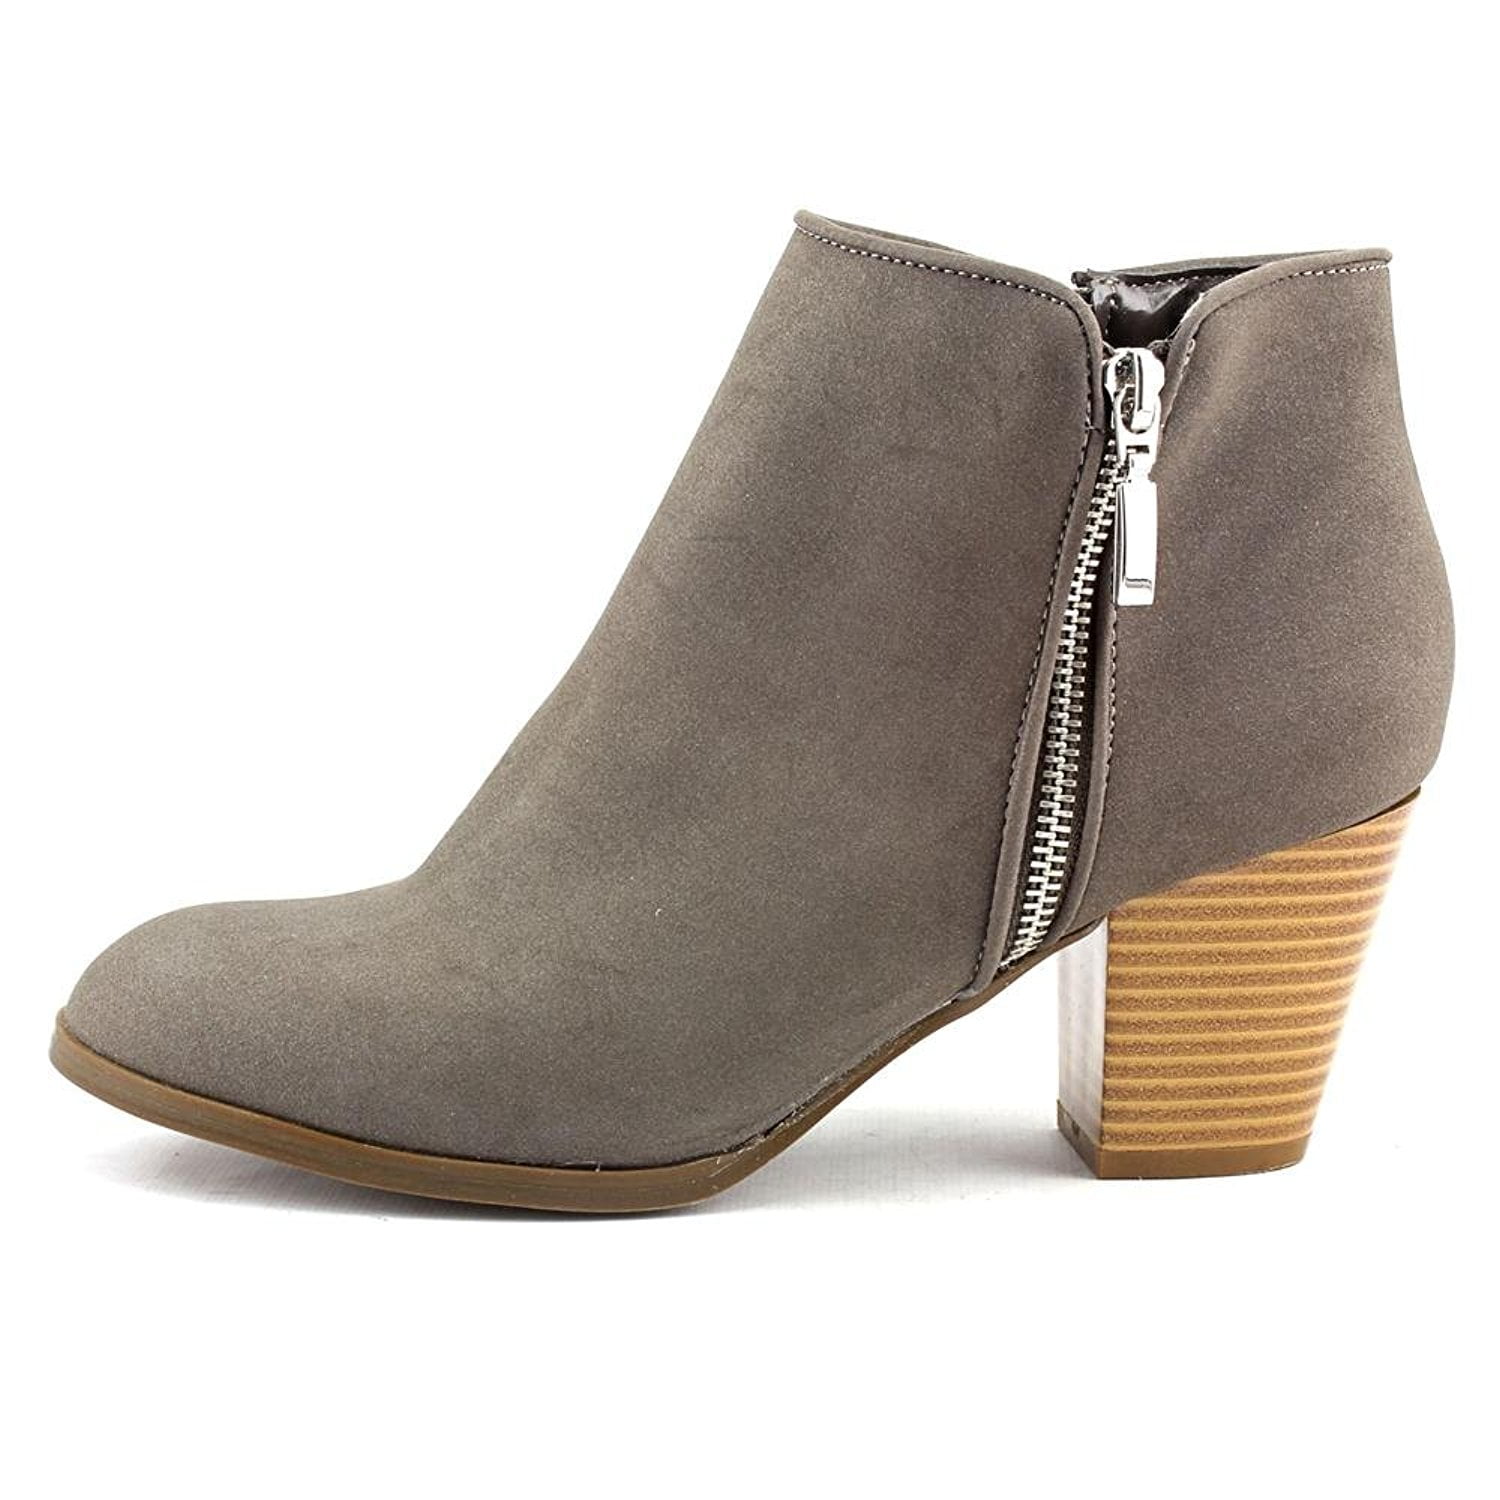 Style & Co. Womens Jamila Leather Almond Toe Ankle Fashion Boots ...